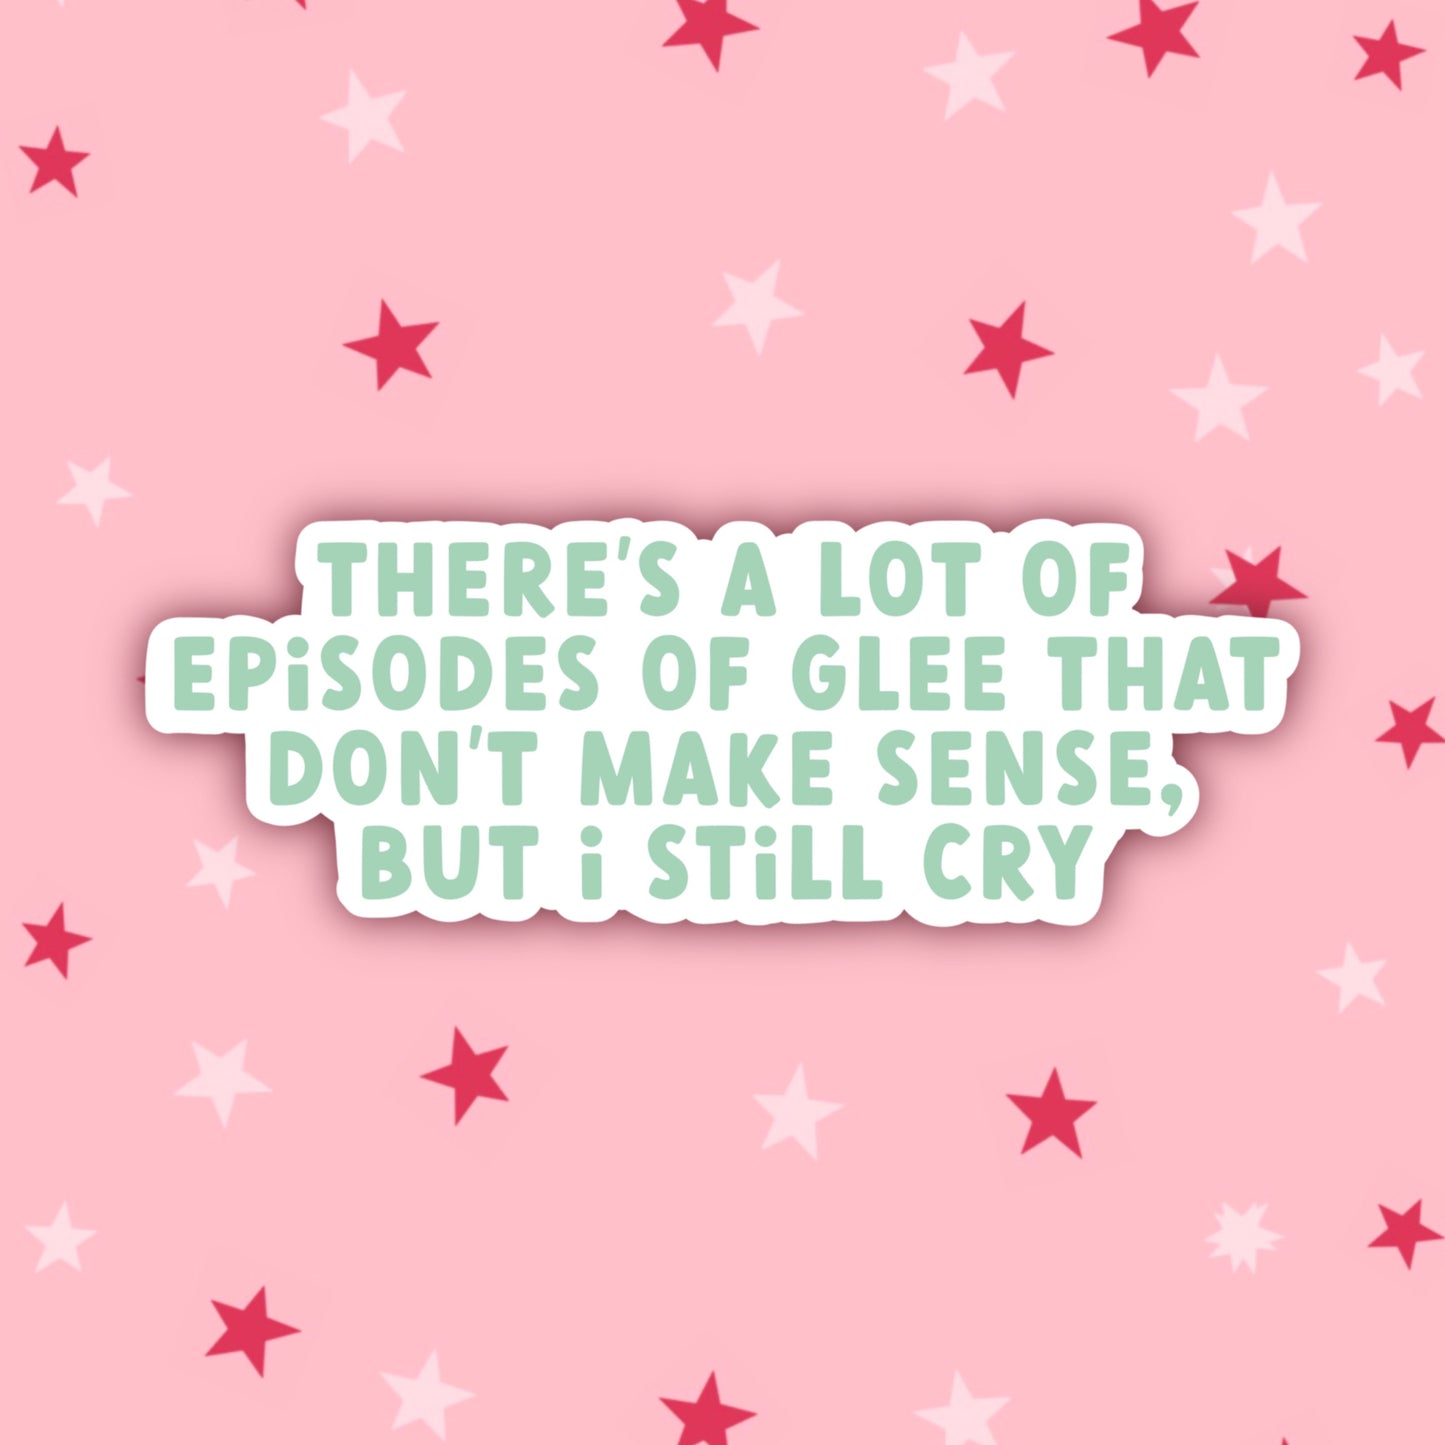 There's A Lot of Episodes of Glee That Don't Make Sense | The Middle